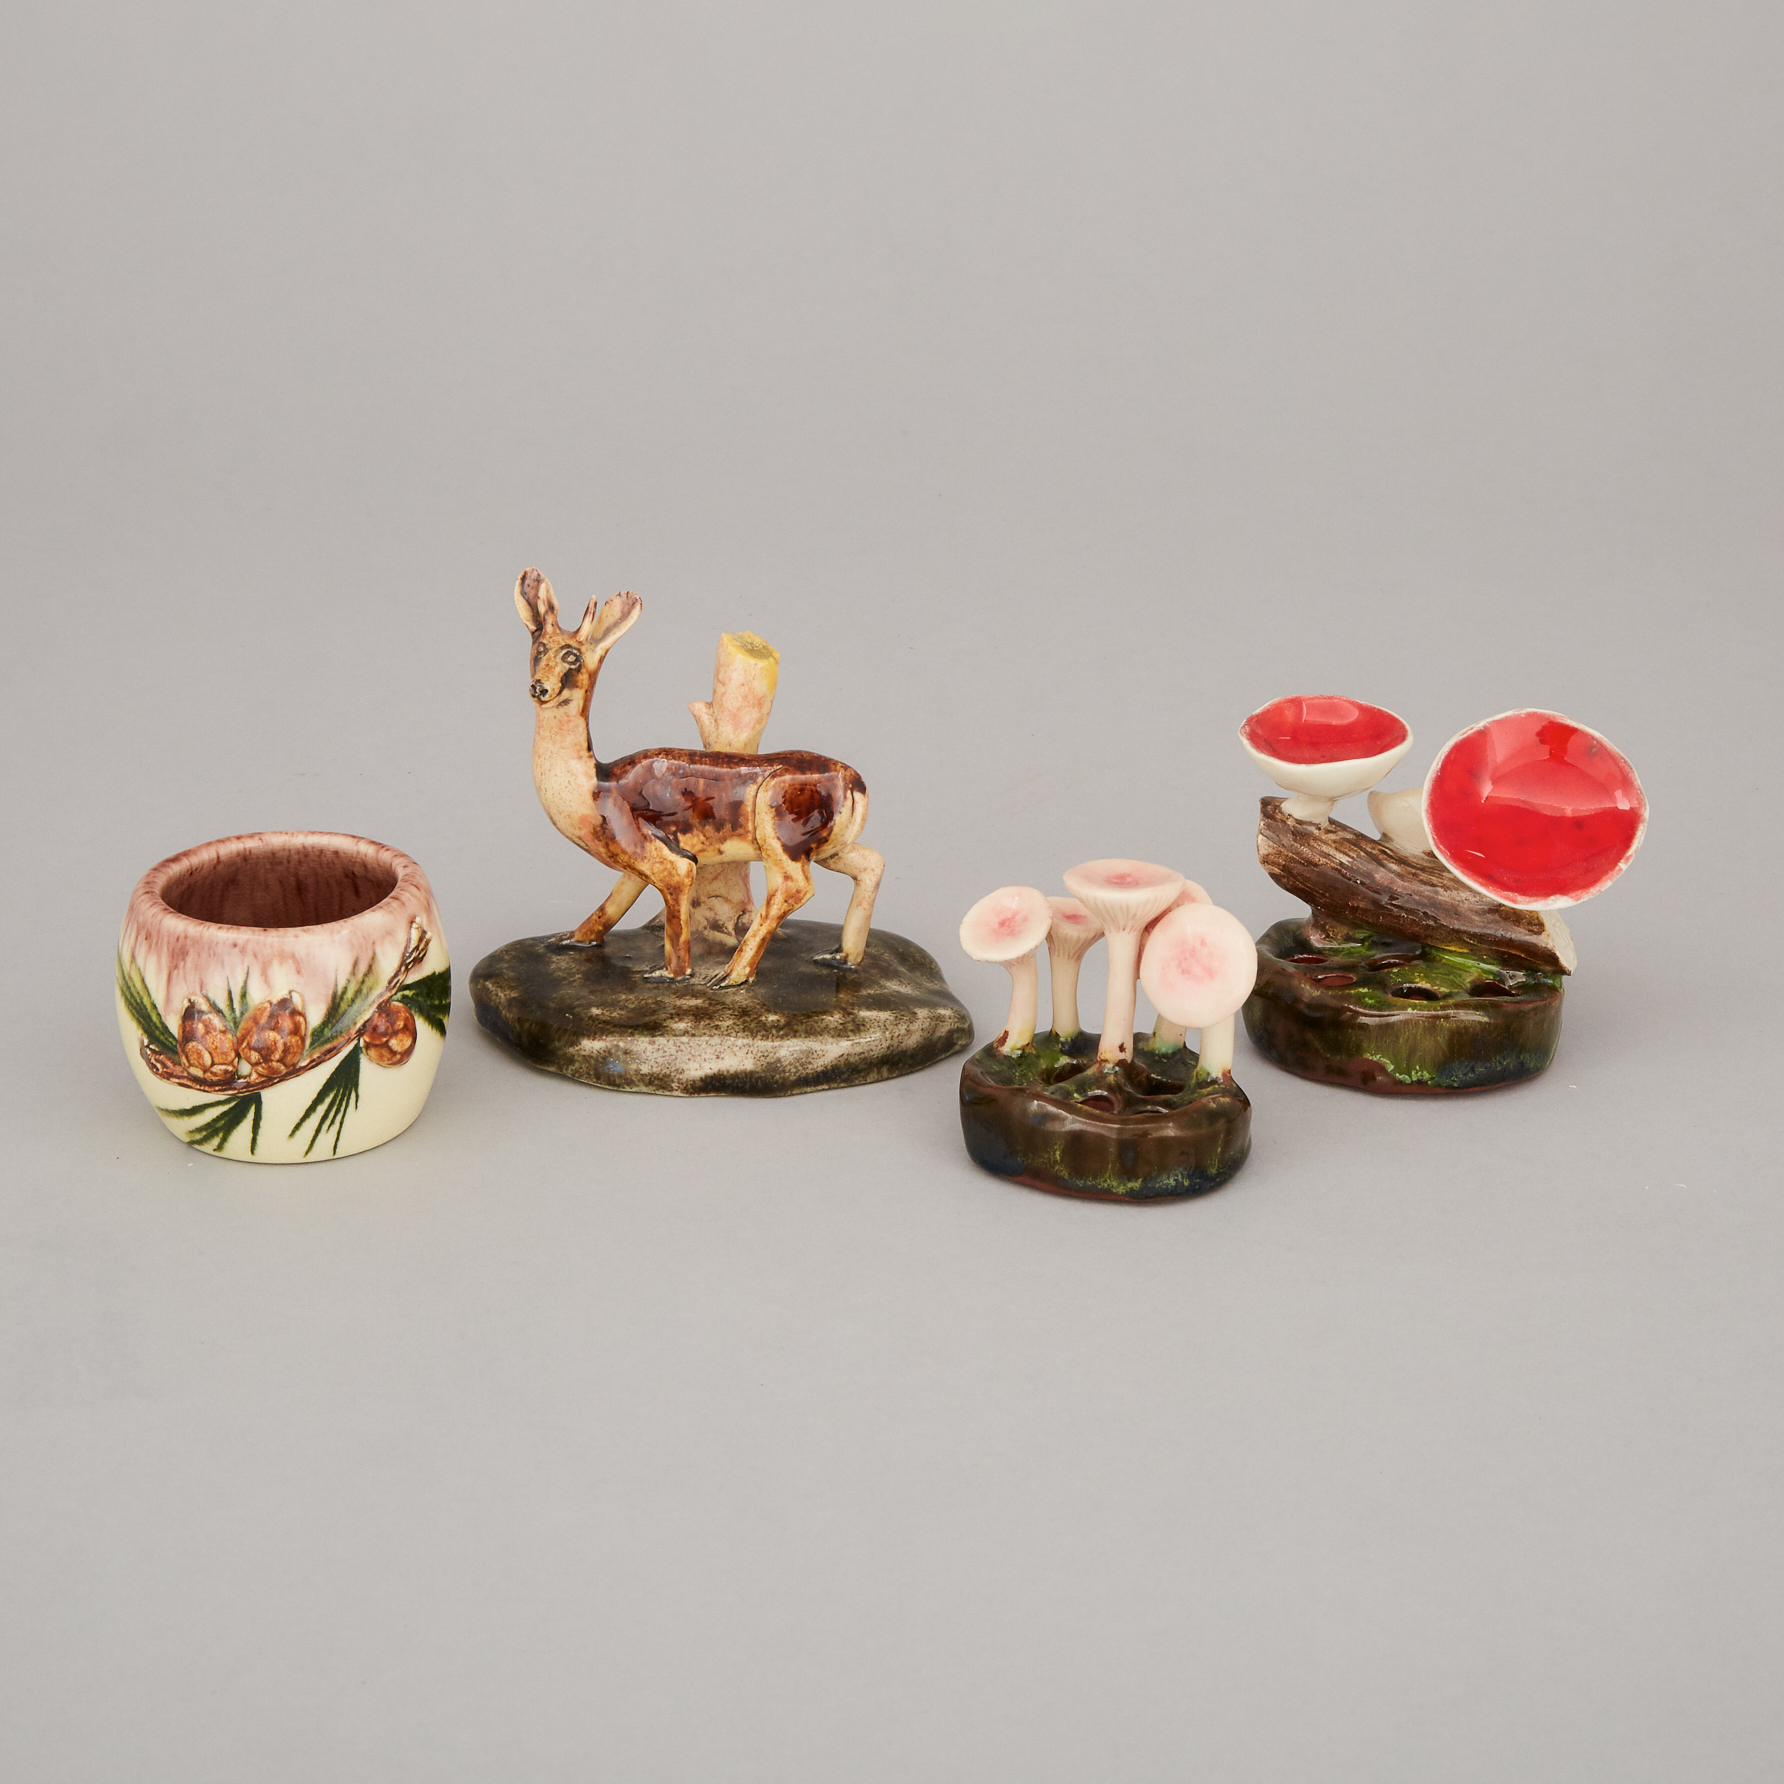 Two Lorenzens Pottery Mycological Groups, Model of a Deer and a Small Pinecone Vase, 20th century